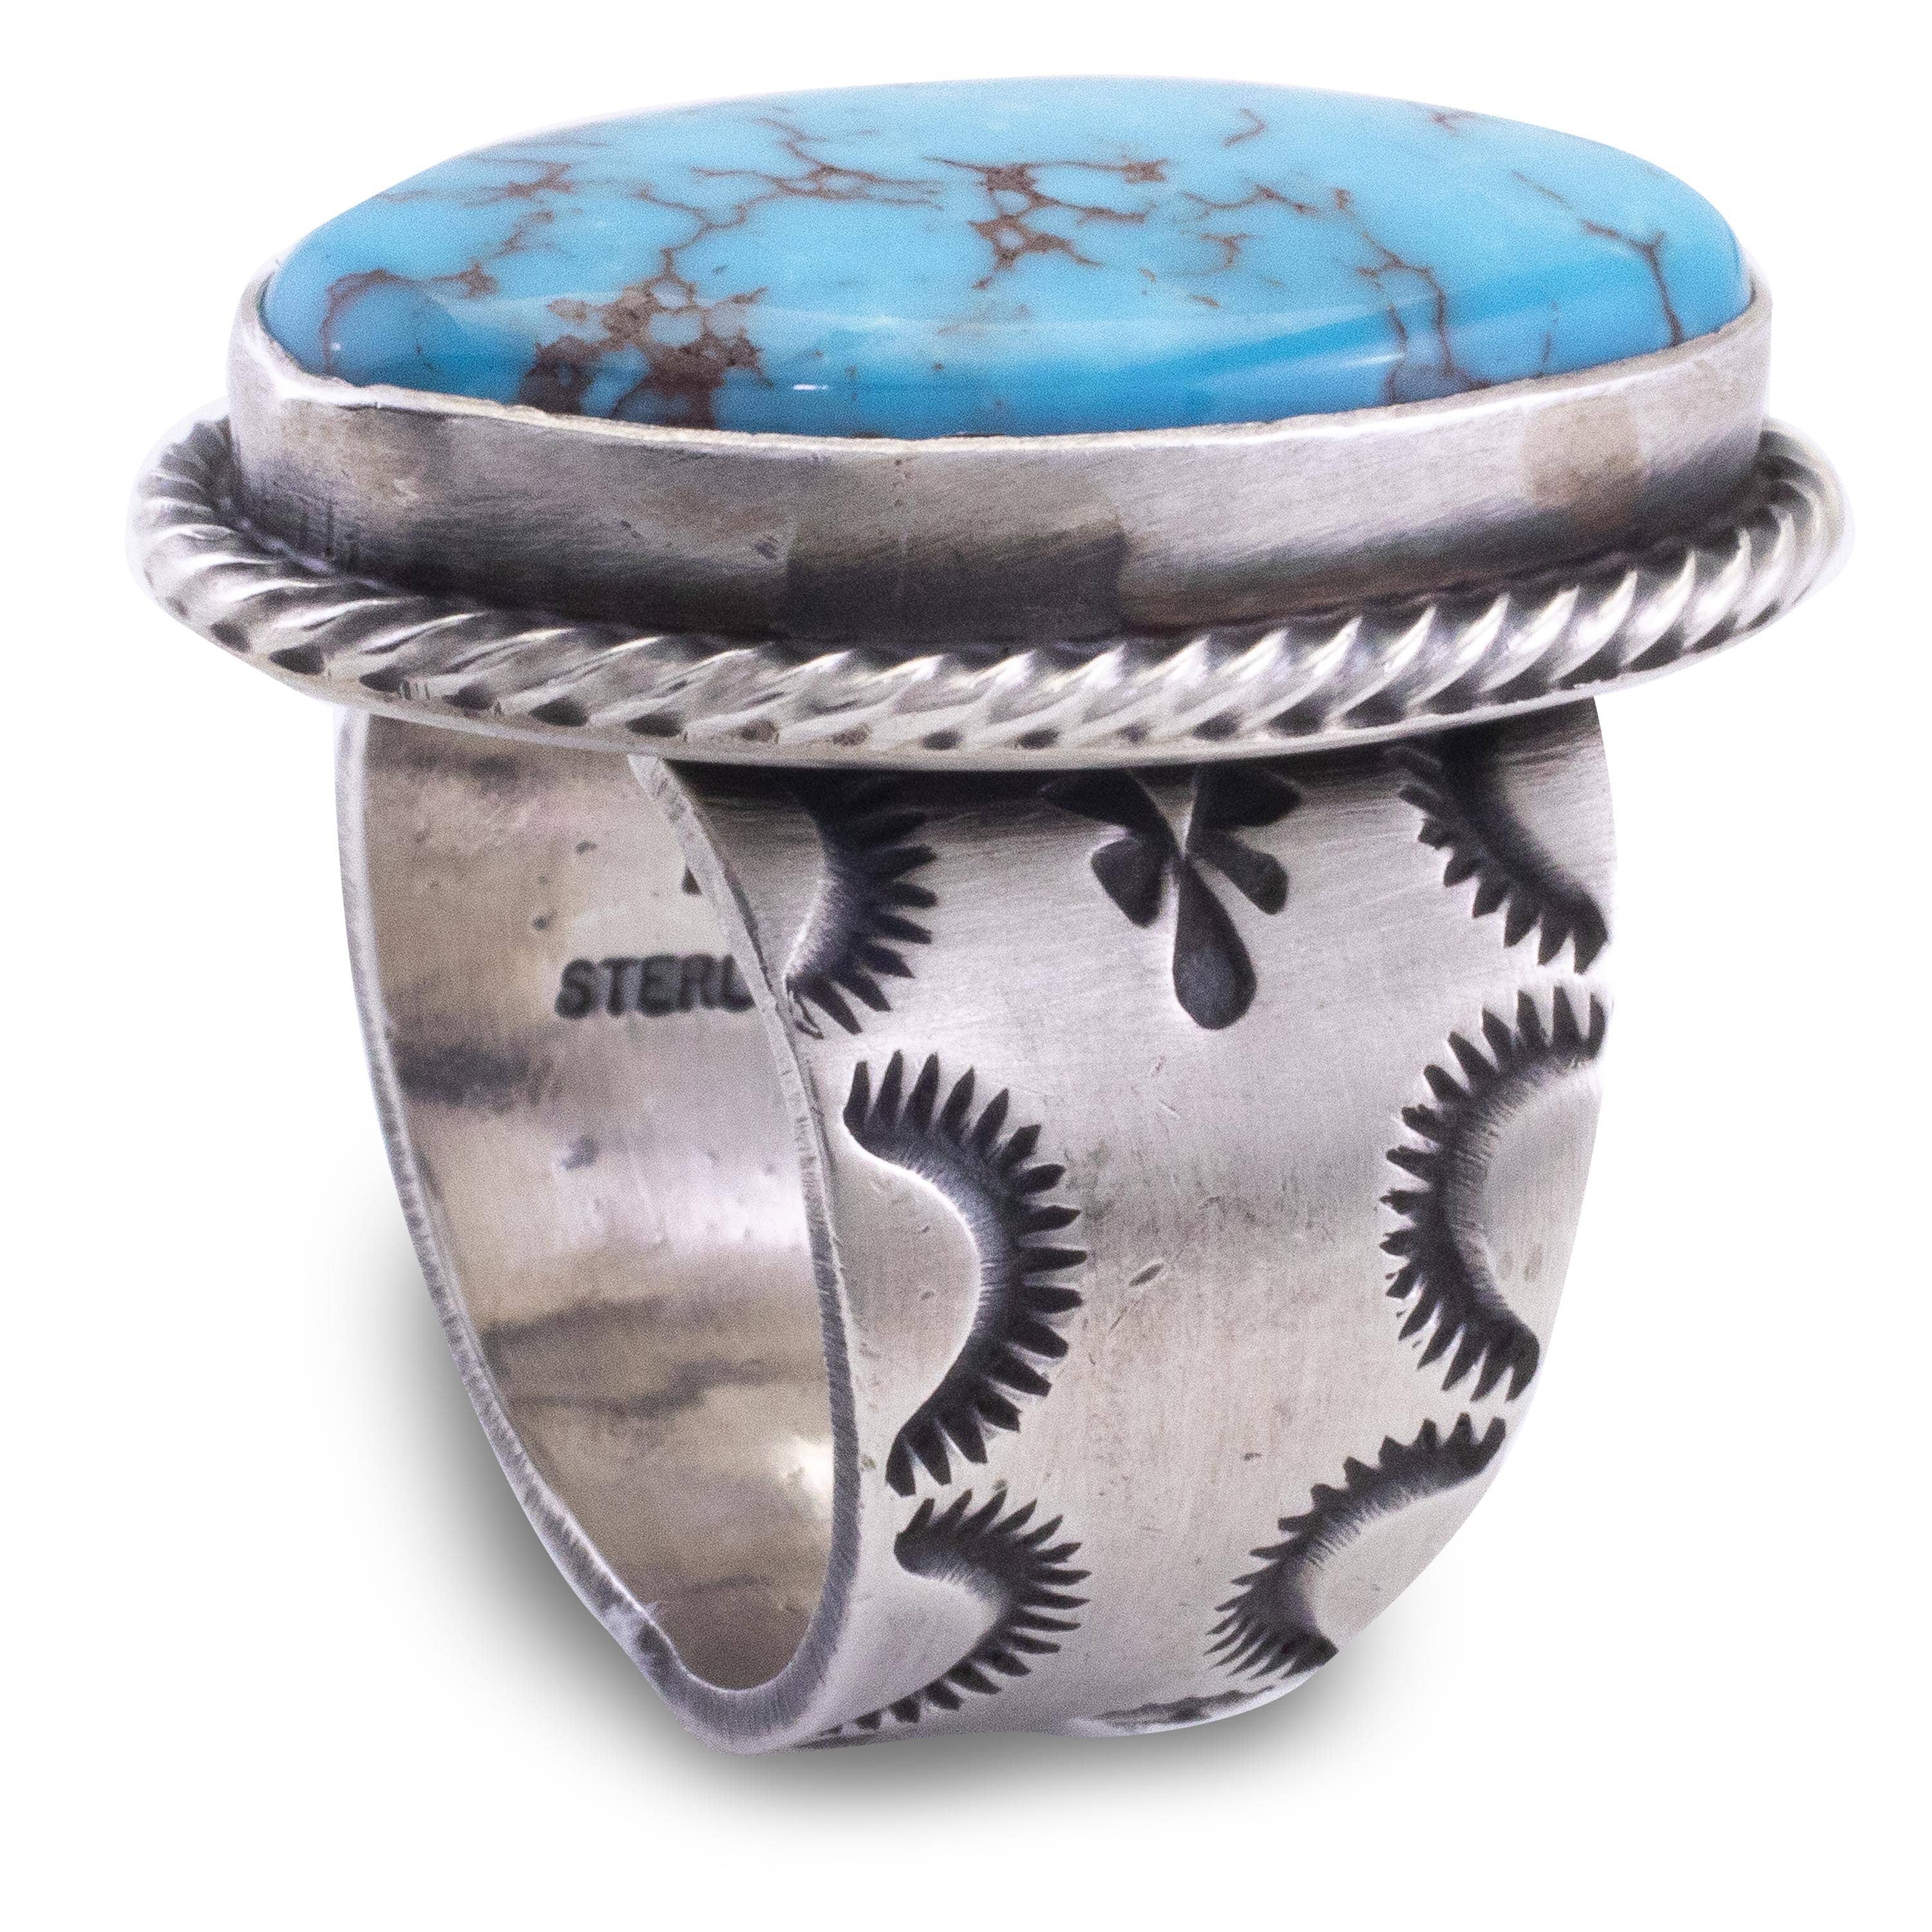 Kalifano Native American Jewelry 8 Prince Turquoise USA Native American Made 925 Sterling Silver Ring NAR1200.047.8